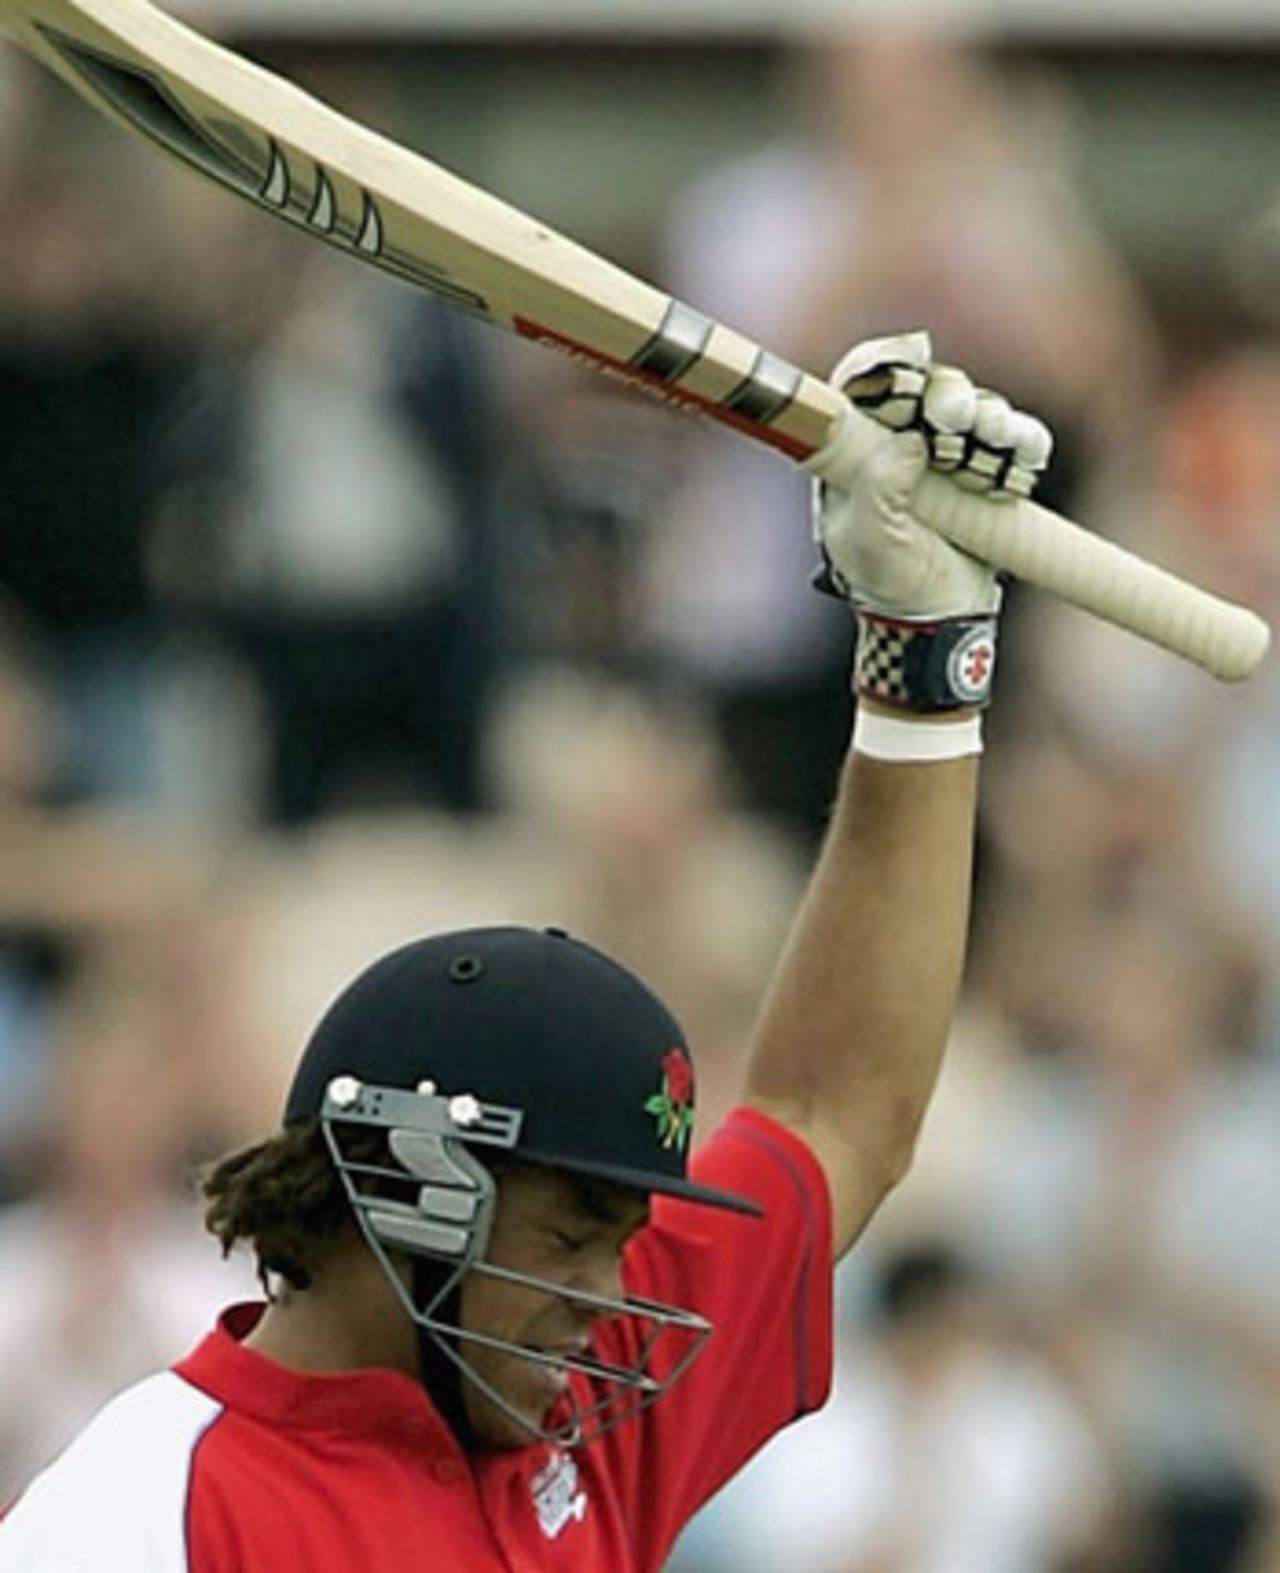 Andrew Symonds raises his bat to celebrate his hundred, on debut for Lancashire, Lancashire v Sussex, Old Trafford, July 15, 2005